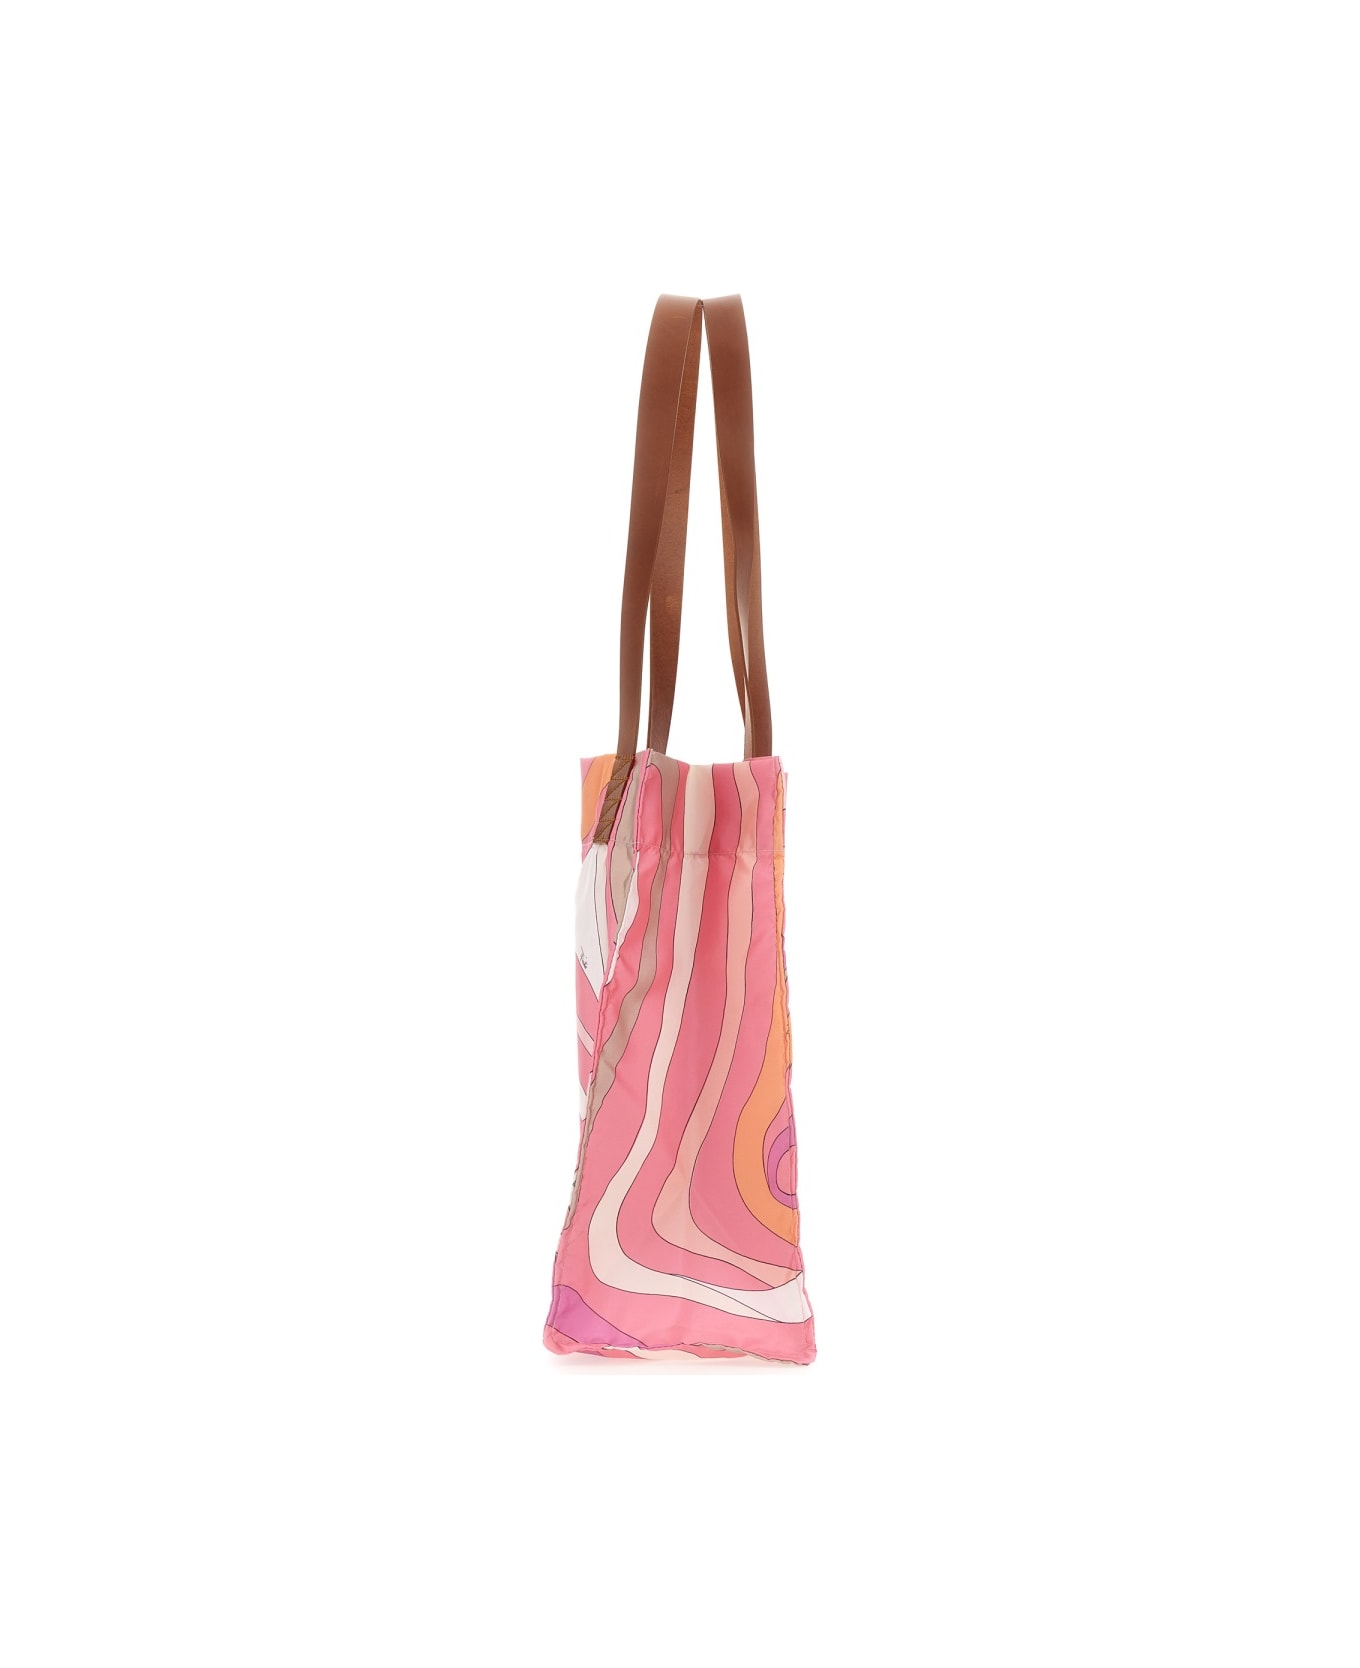 Pucci Patterned Tote Bag - PINK